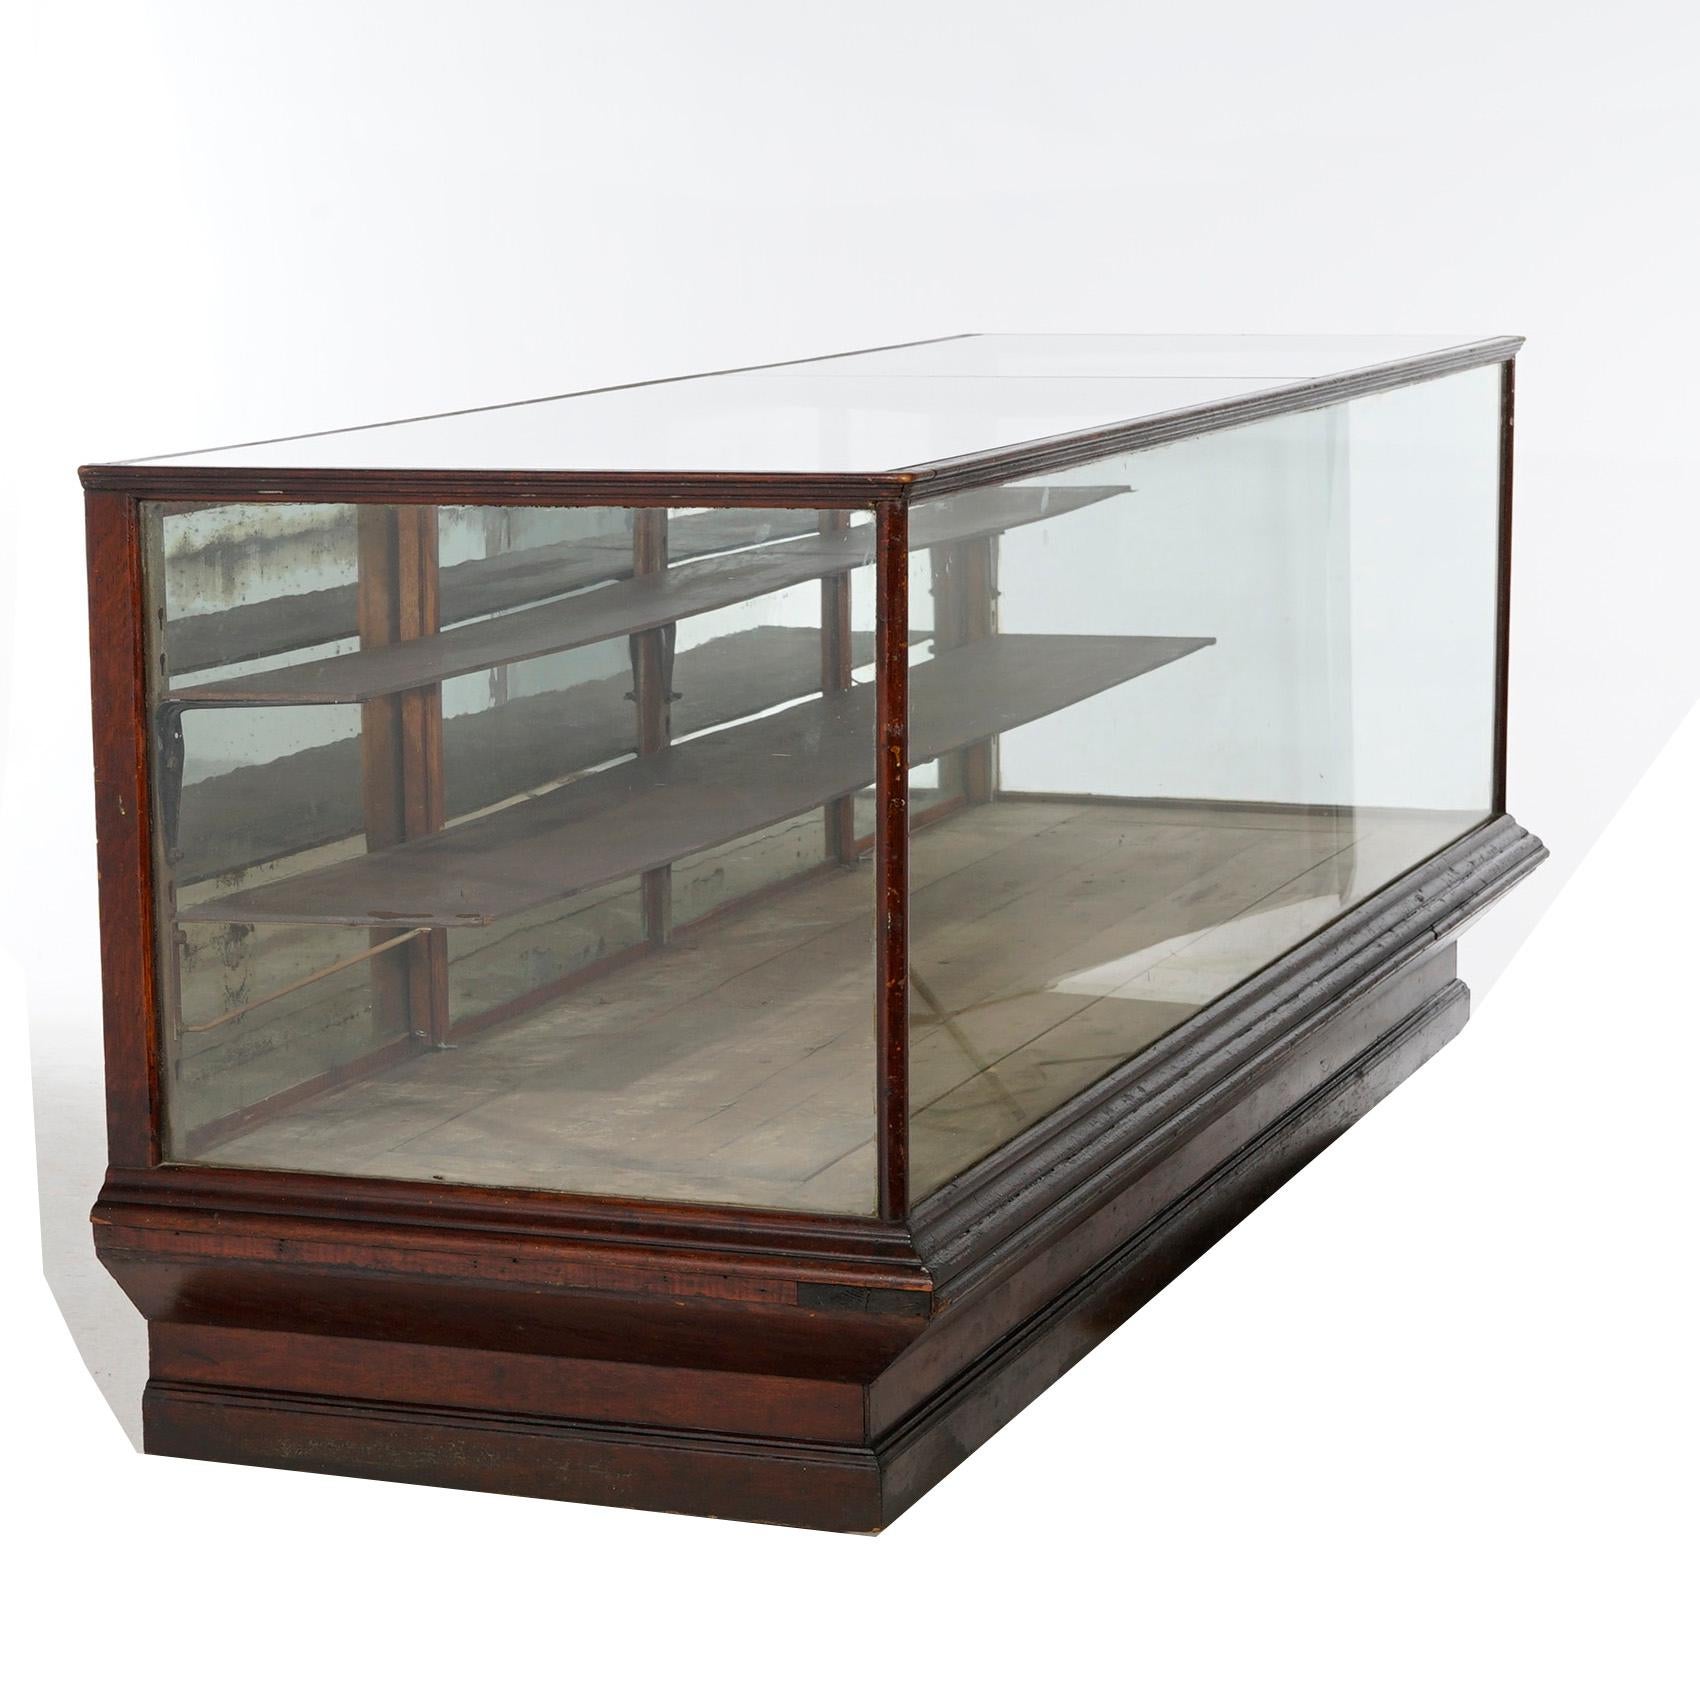 American Antique Oak & Glass Country Store Counter Showcase Display Cabinet, circa 1900